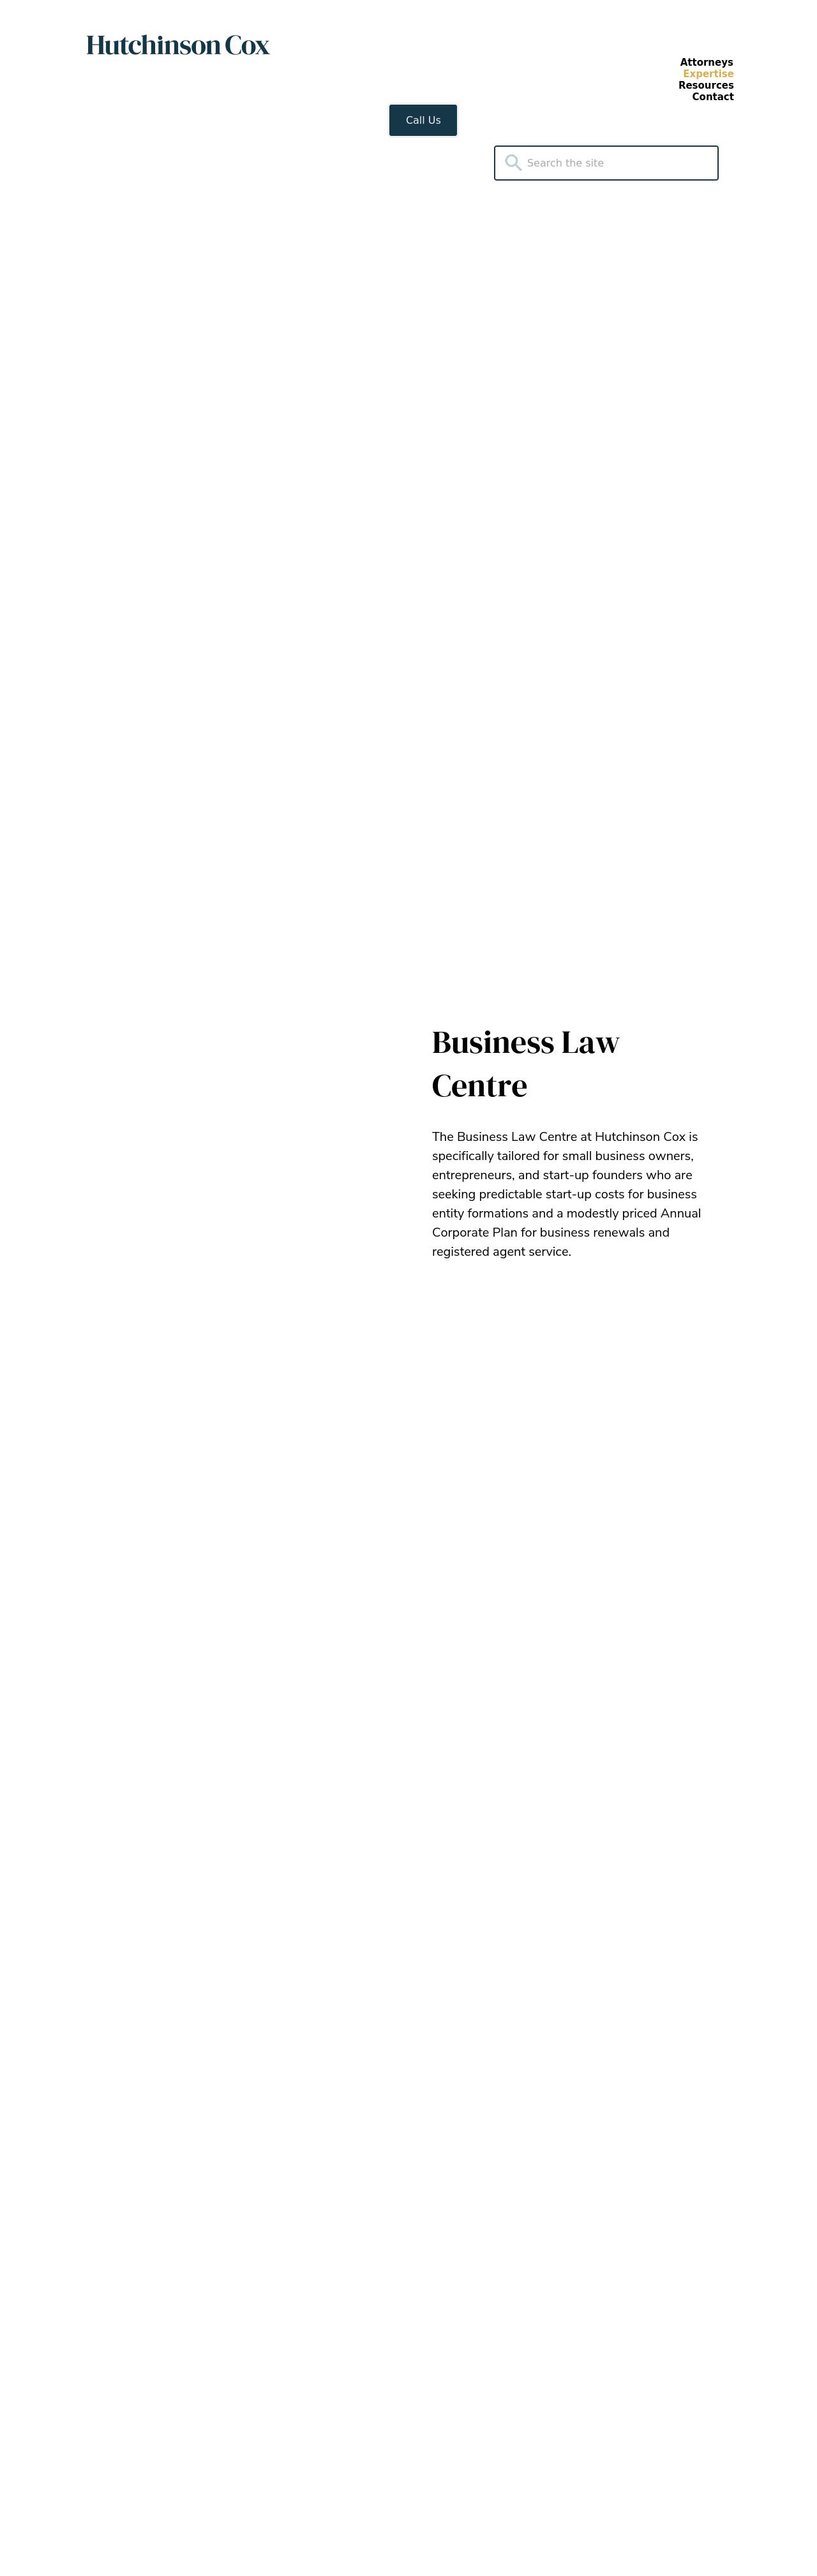 Business Law Centre - Eugene OR Lawyers